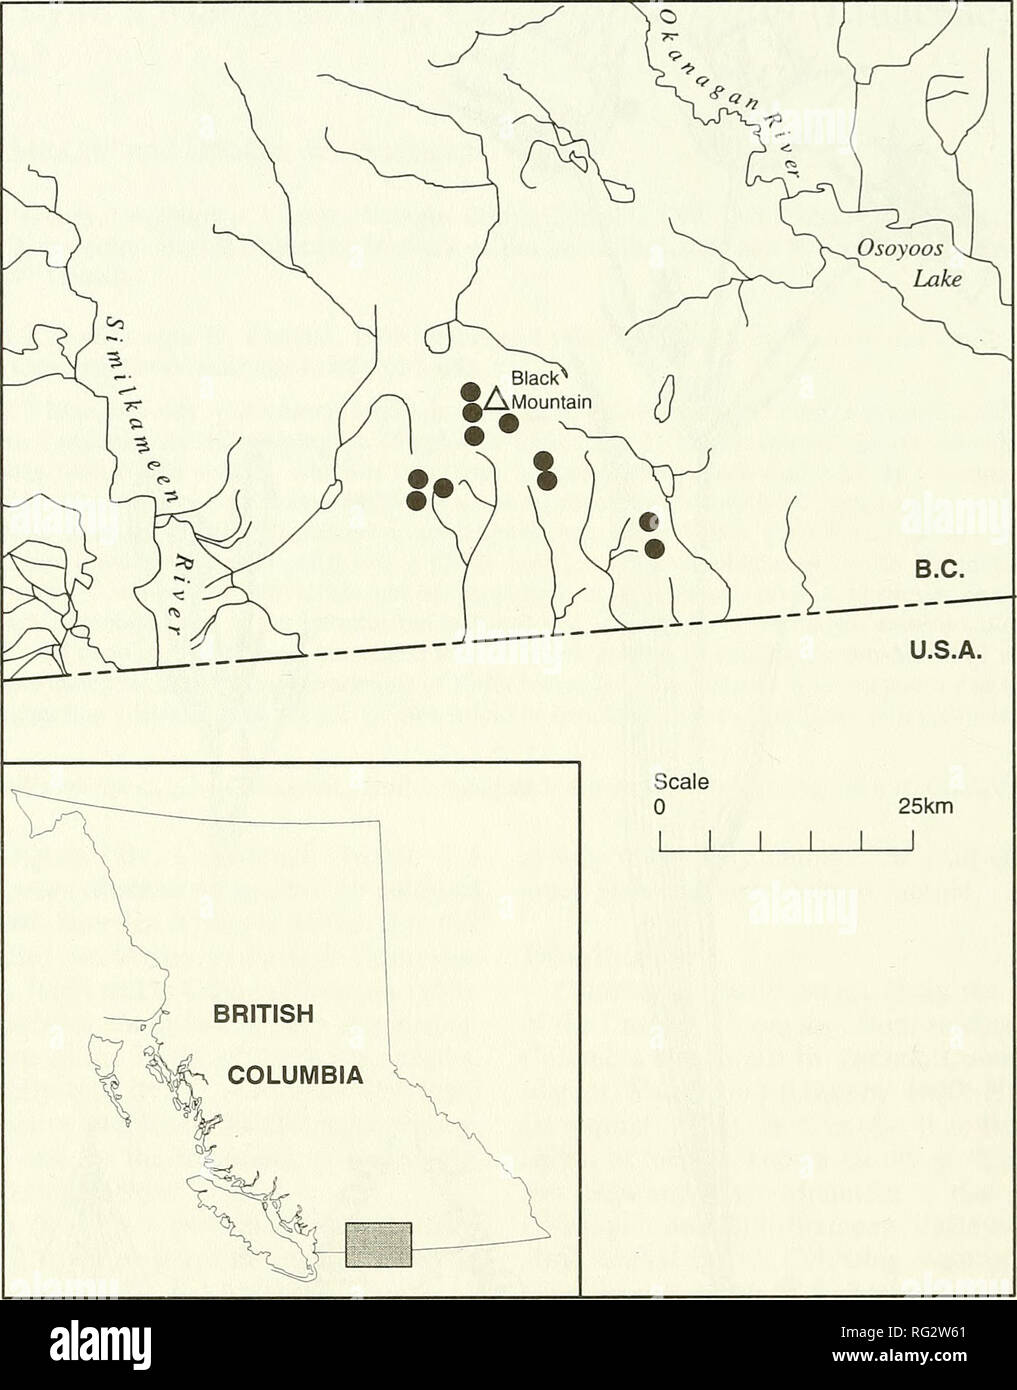 . The Canadian field-naturalist. 654 The Canadian Field-Naturalist Vol. 113. Figure 2. Distribution of Calochortiis lyallii in British Columbia. (• - recently confirmed sites) grasses commonly associated with Calochortus lyallii are Junegrass (Koeleria micrantha) and Pinegrass {Calamagrostis rubescens). Common forbs include Death Camass (Zygadenus venonosus). Yellow Bell (Fritillaria pudica), Arrowleaf Balsamroot (Bal- samorhiza sagittata). Silky Lupine {Lupinus sericeus), and Blue-eyed Mary (Collinsio pannflora). On drier sites, BitteiToot {Lewisia rediviva) and Big Sagebrush {Artemisia tride Stock Photo